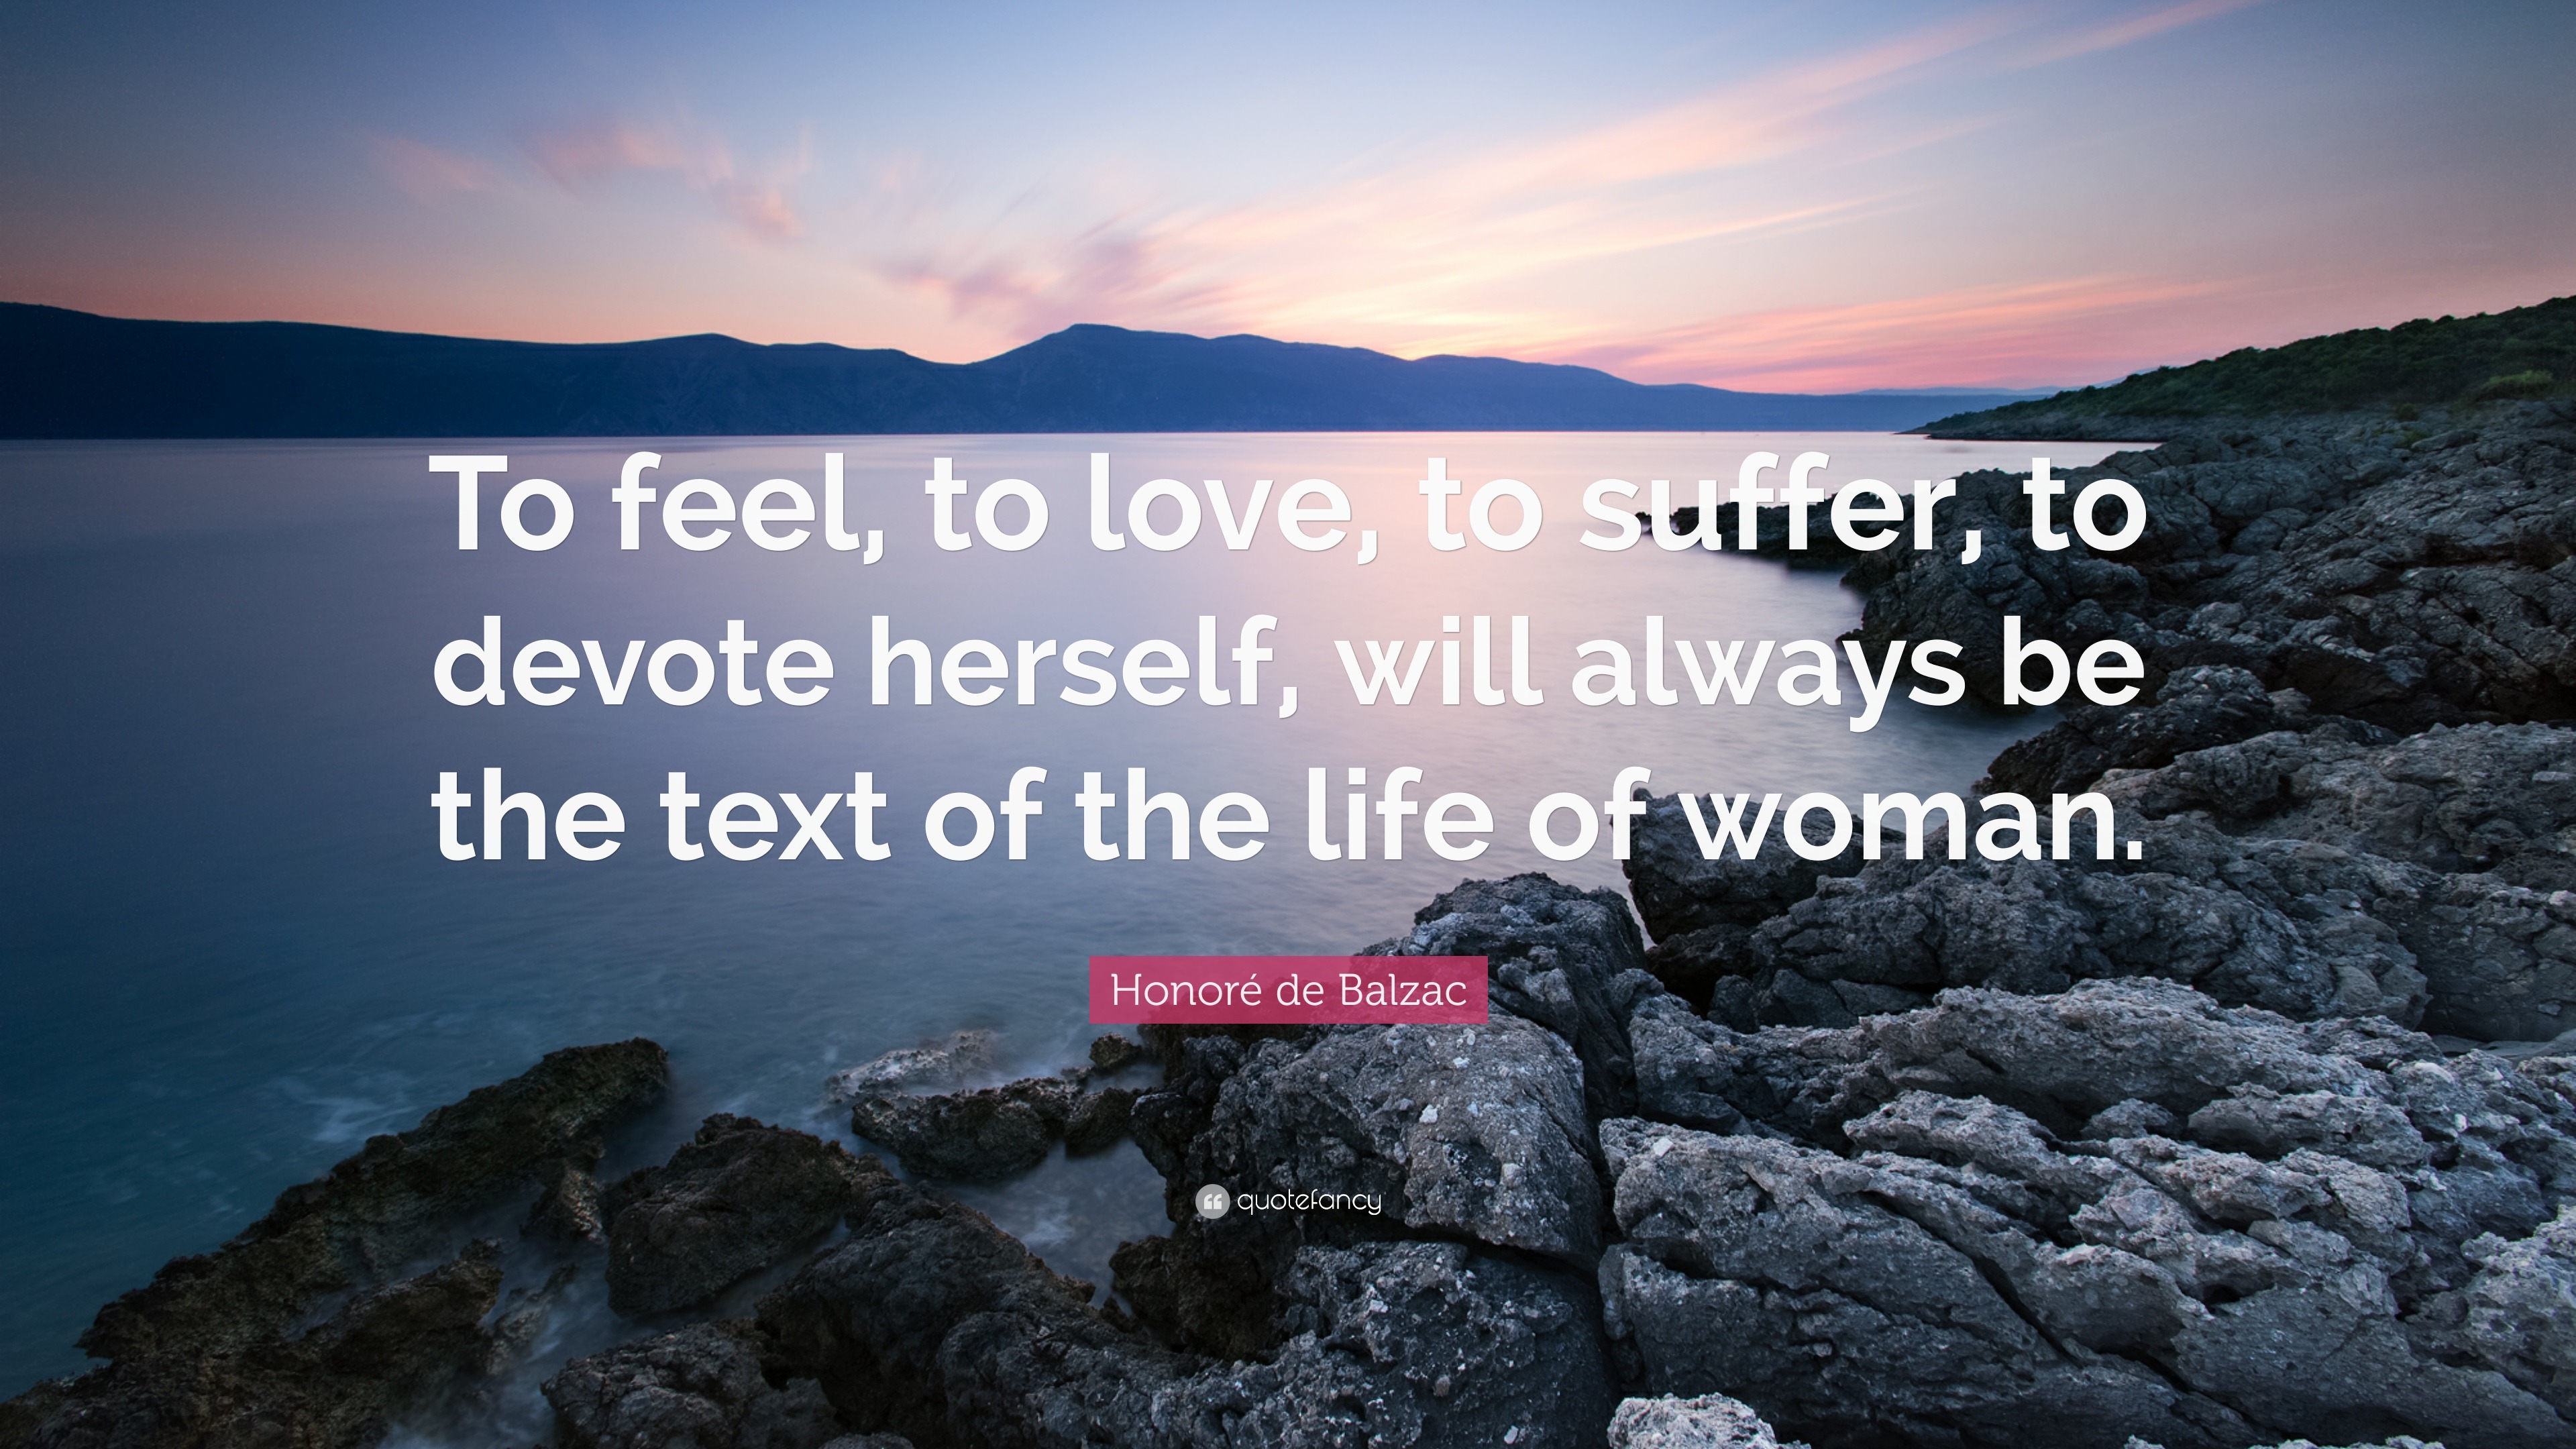 Honoré de Balzac Quote: “To feel, to love, to suffer, to devote herself ...